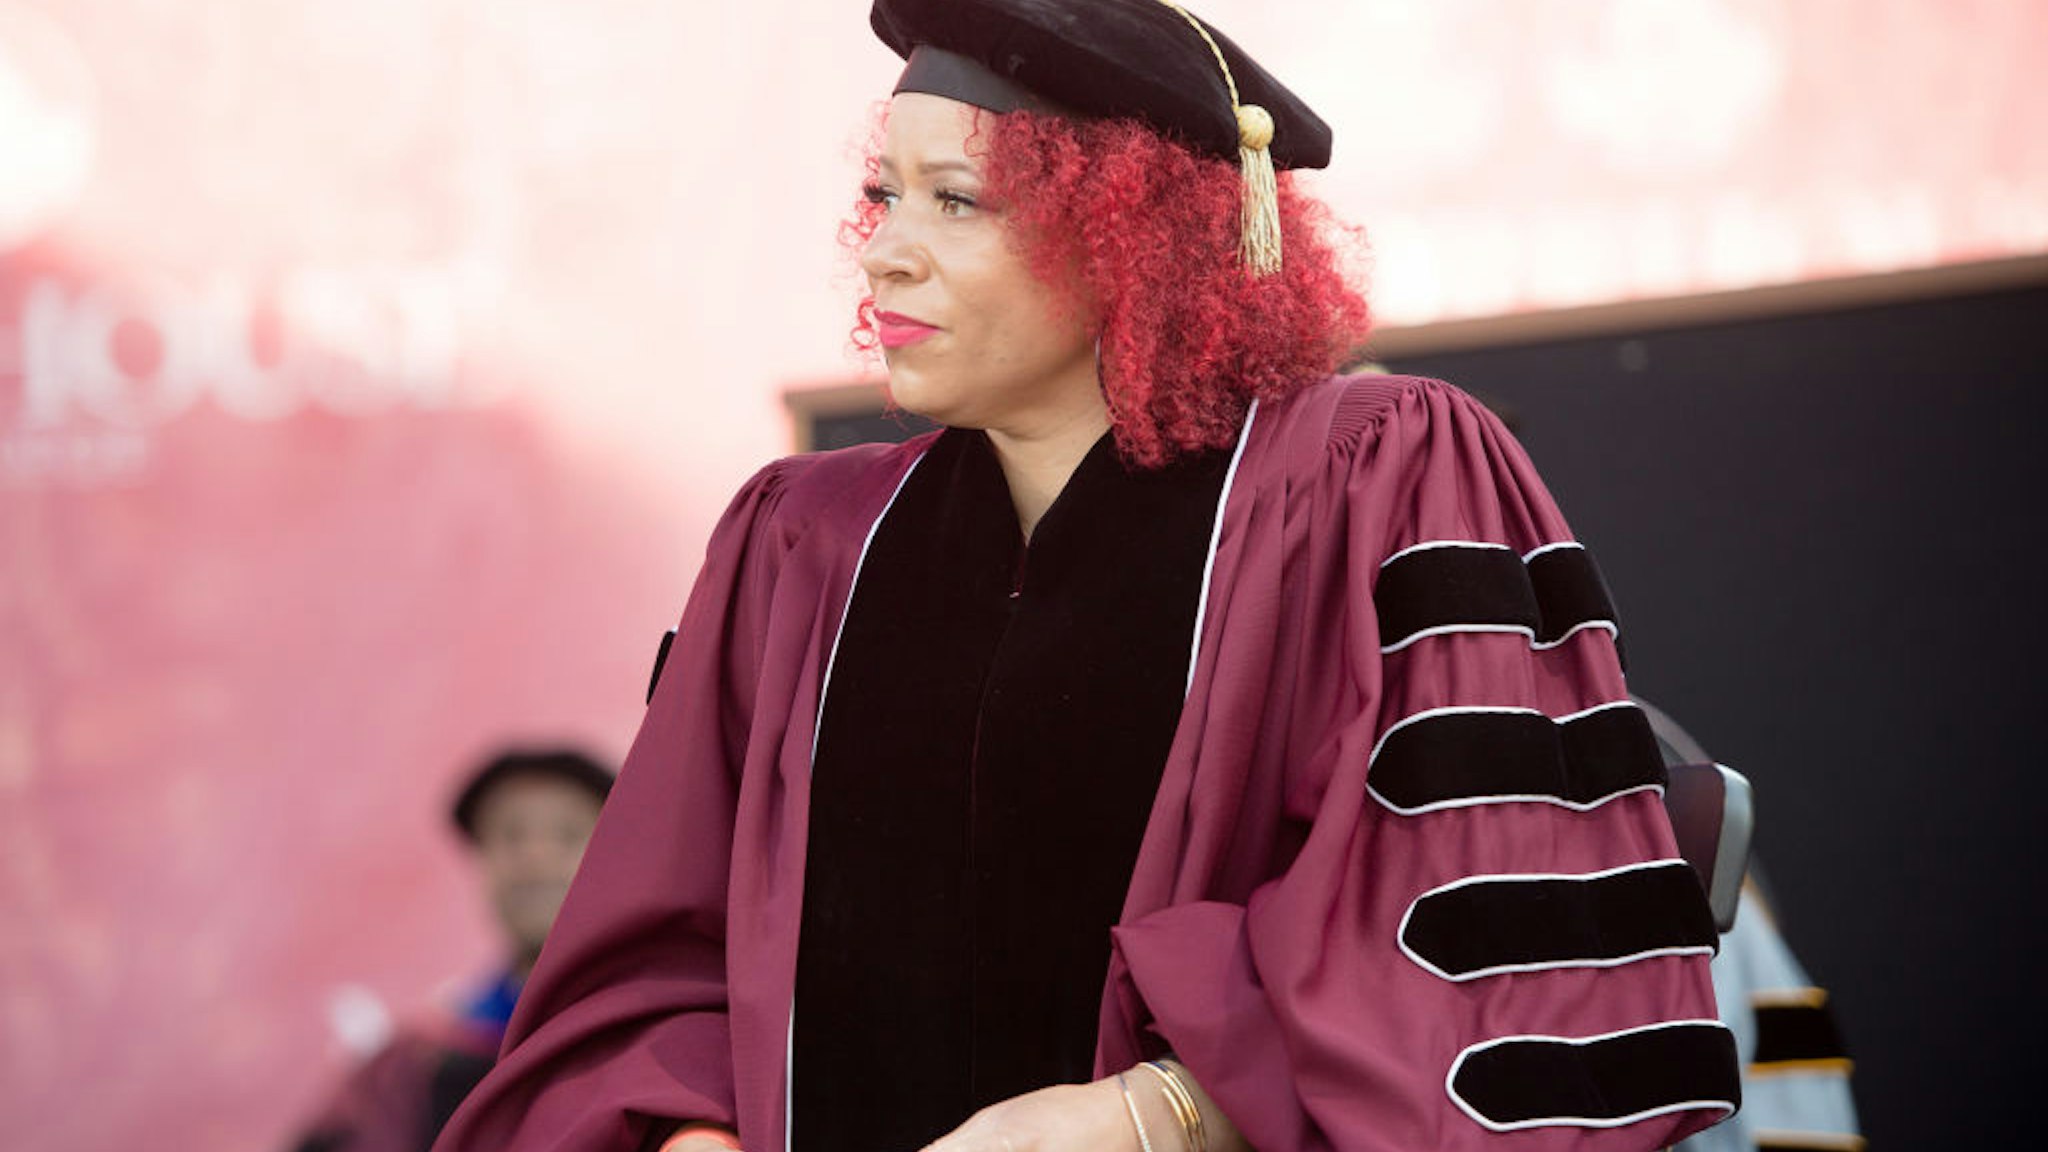 ATLANTA, GEORGIA - MAY 16: Author Nikole Hannah-Jones attends the 137th Commencement at Morehouse College on May 16, 2021 in Atlanta, Georgia.